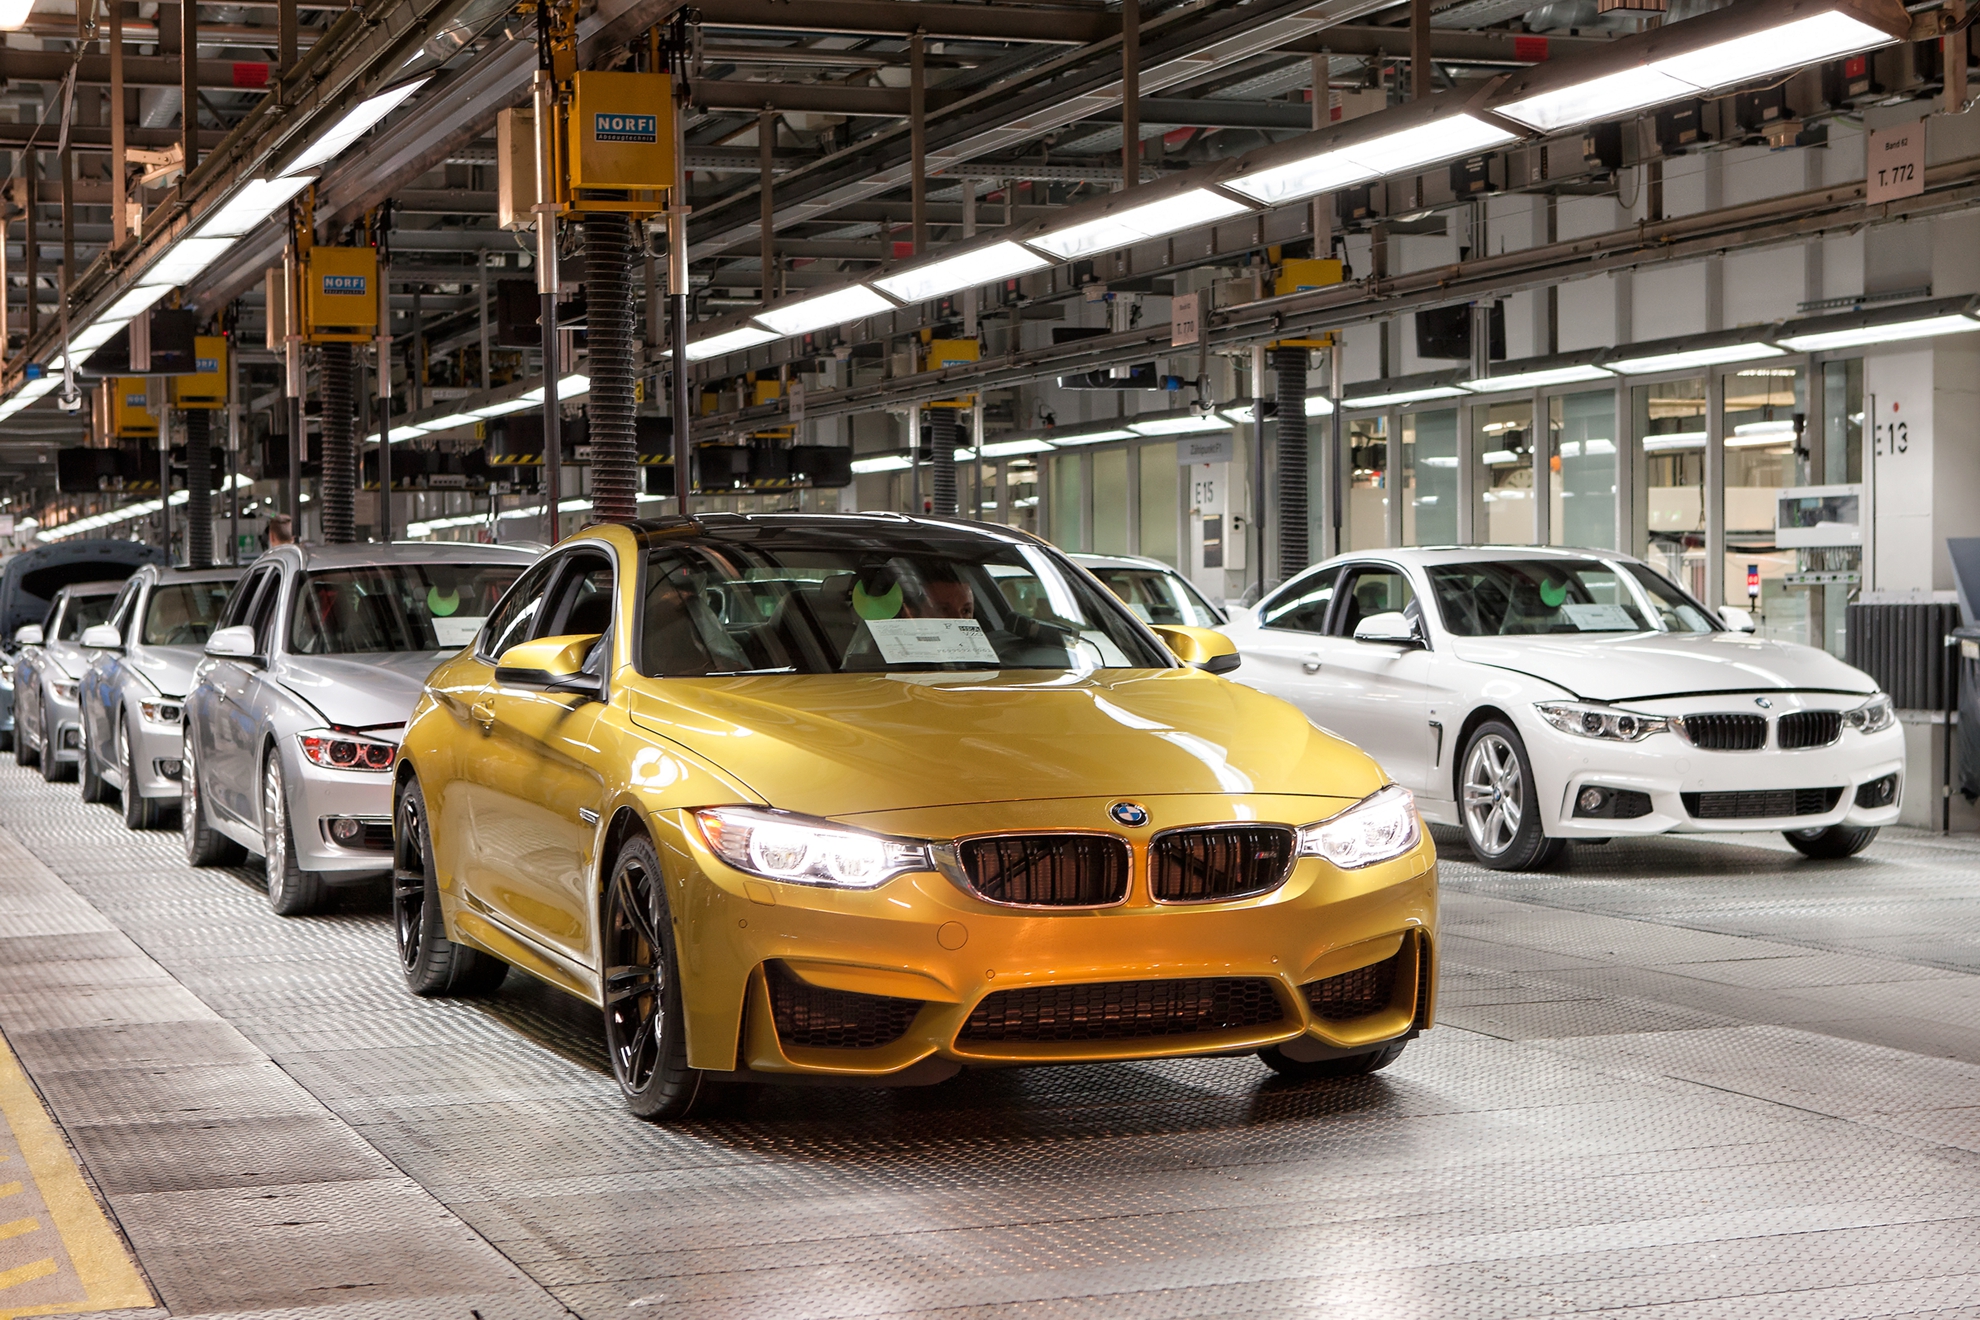 The BMW Group’s strategy: Production follows the market